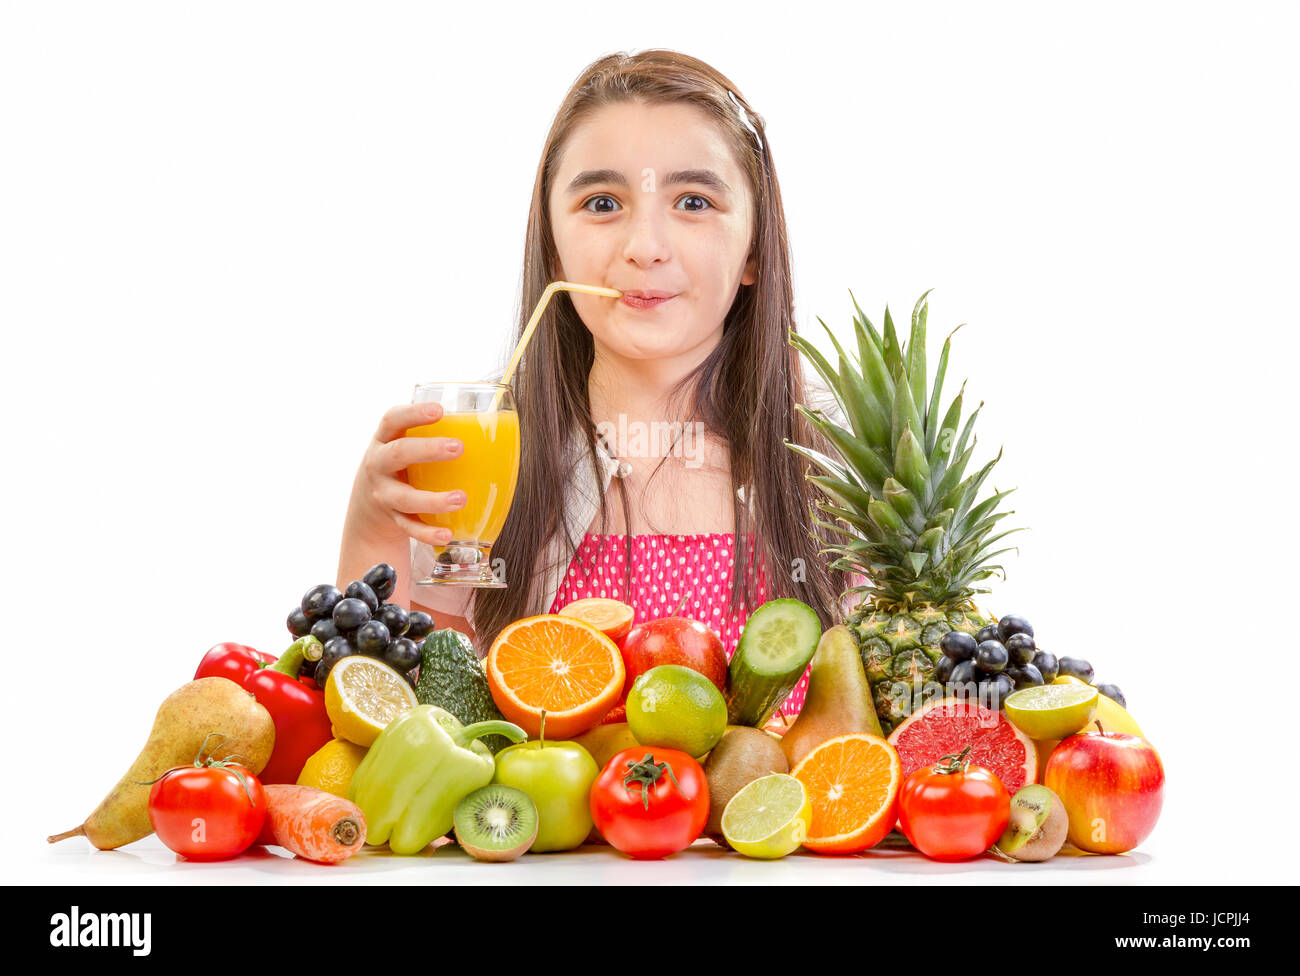 Little girl drinking orange juice. Little girl with fruits - Happy girl with fruits assortment on the table. Stock Photo